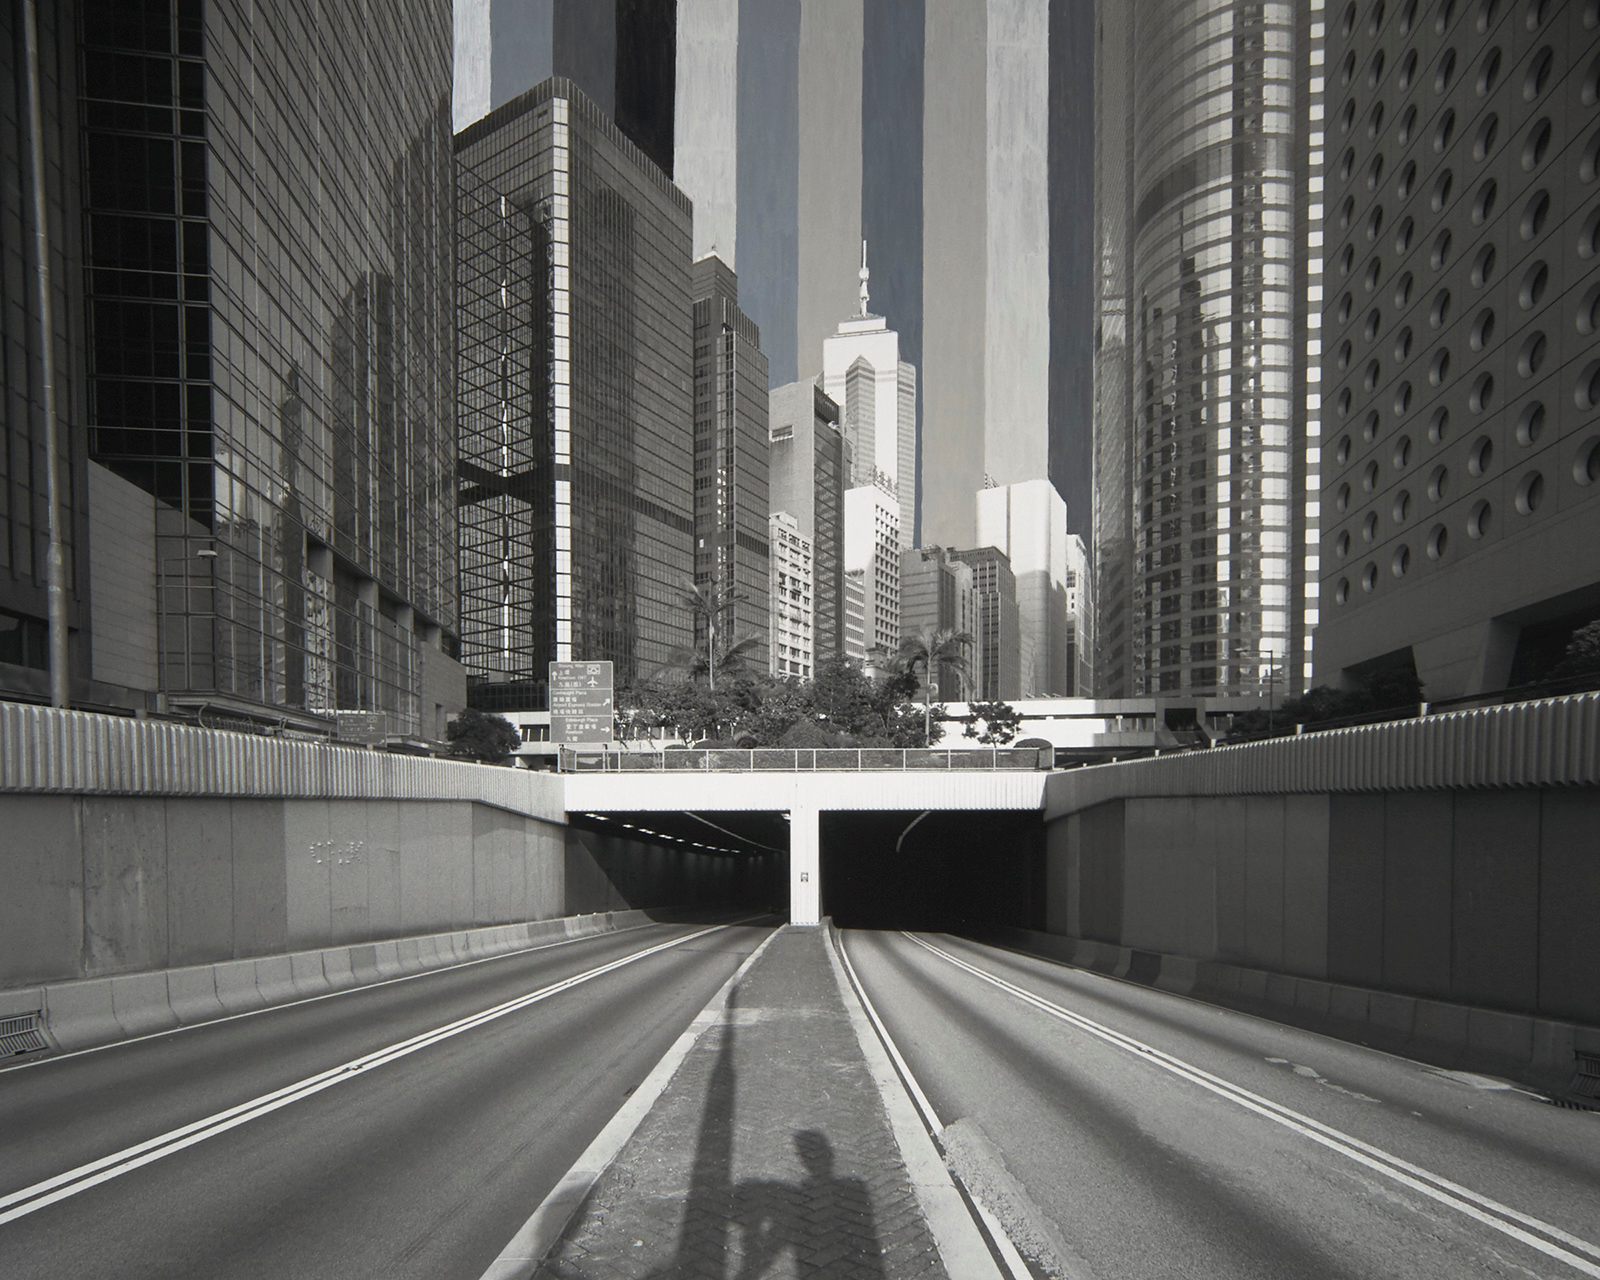 An image by South Ho of the Harcourt Road underpass from his show "good day good night" at the Blindspot Gallery.